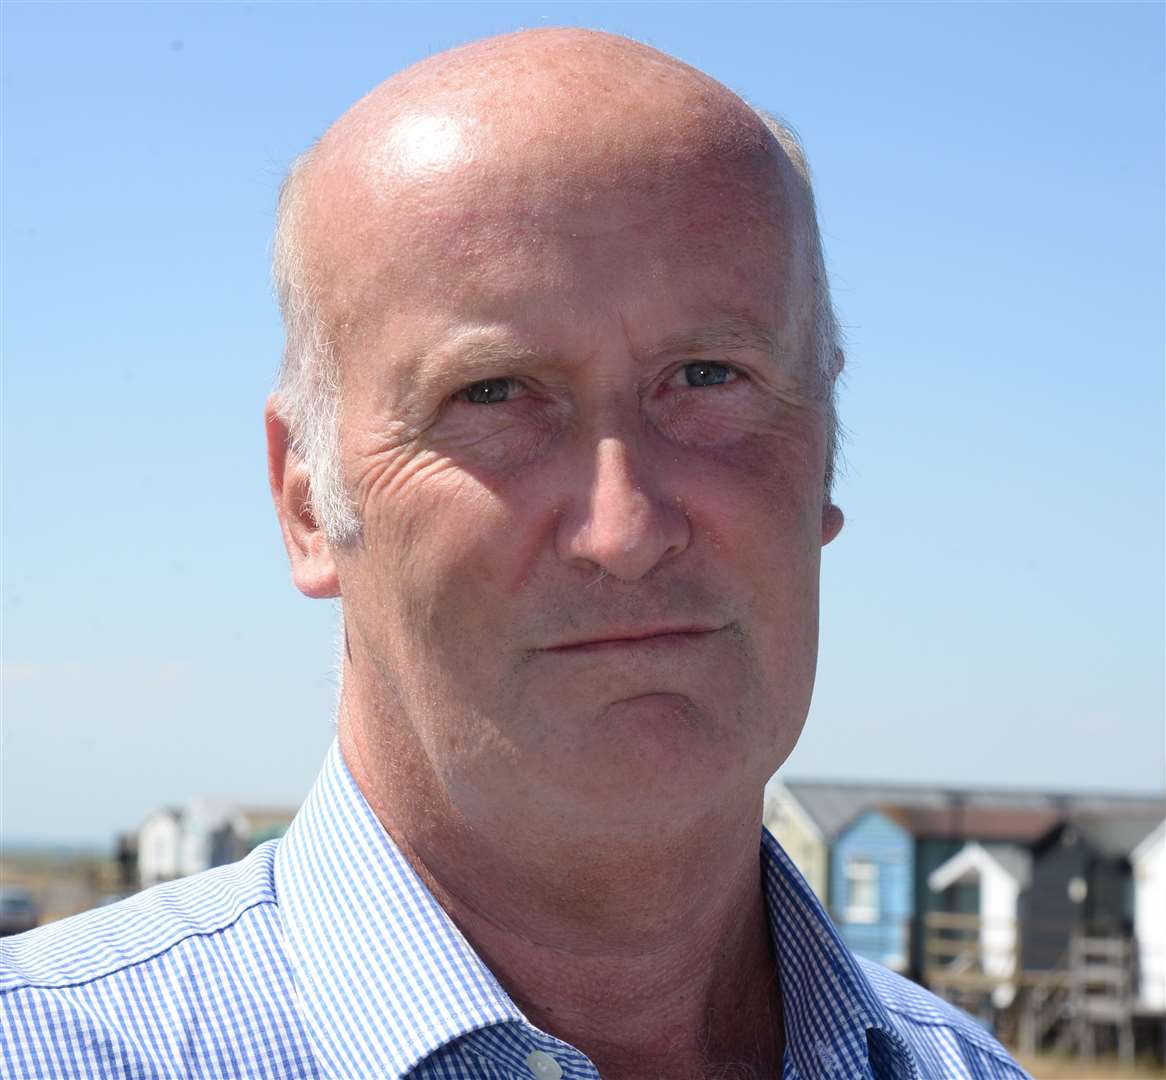 Seasalter councillor Ashley Clark has called for £5,000 fines for repeat offenders. Picture: Chris Davey